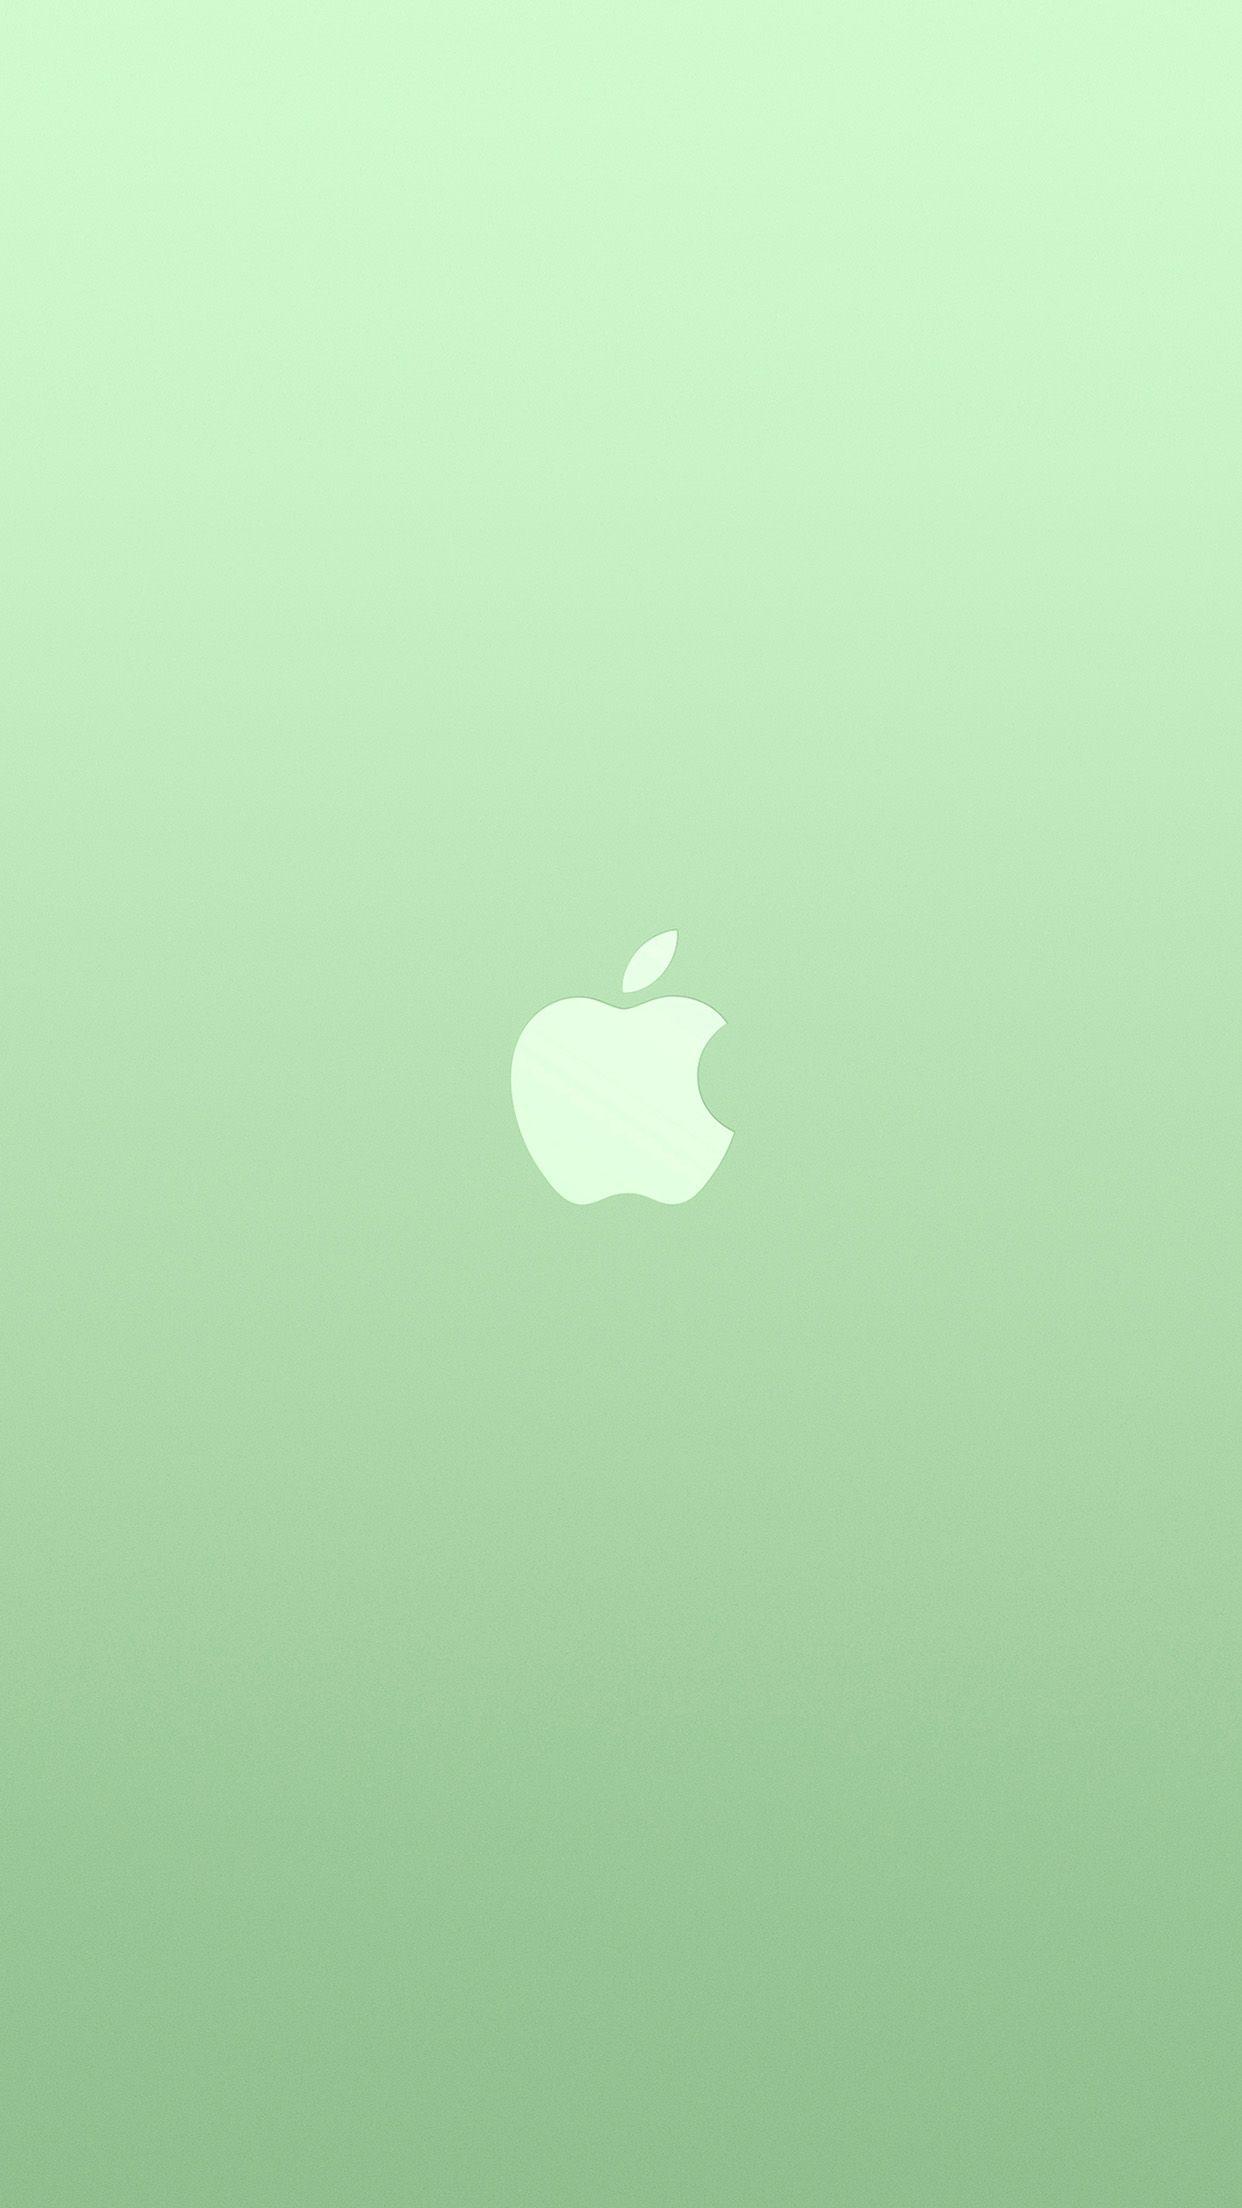 Green iPhone Logo - iPhone7papers.com | iPhone7 wallpaper | au18-logo-apple-green-white ...